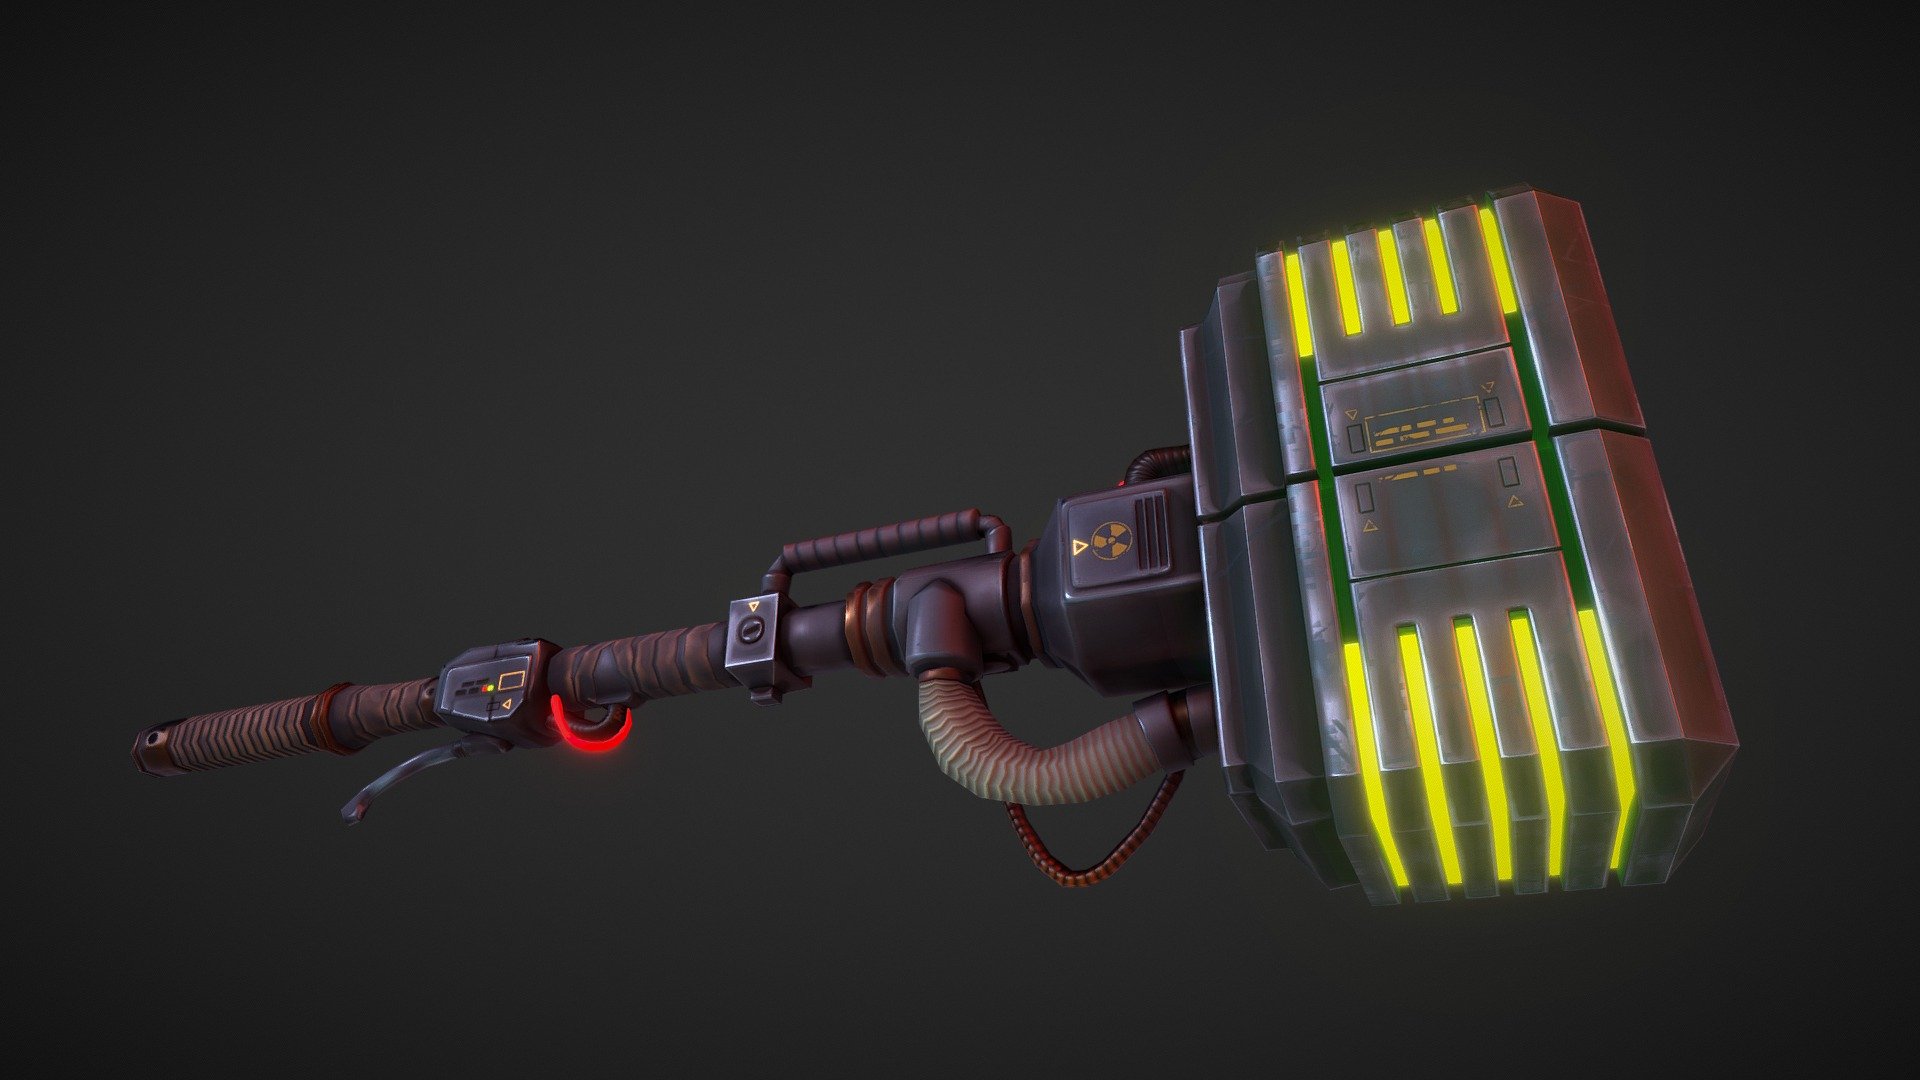 This one met a bit of a midpoint in terms of style between the last two, but I'm still quite happy with how it turned out after everything. Nothing like a big smashy hammer to fix all yo problems.

Modelled in Maya, textured in Substance Painter.

Concept by Luke Viljoen - Power Hammer - Hero Grinder Fan Art - Download Free 3D model by Rexotec 3d model